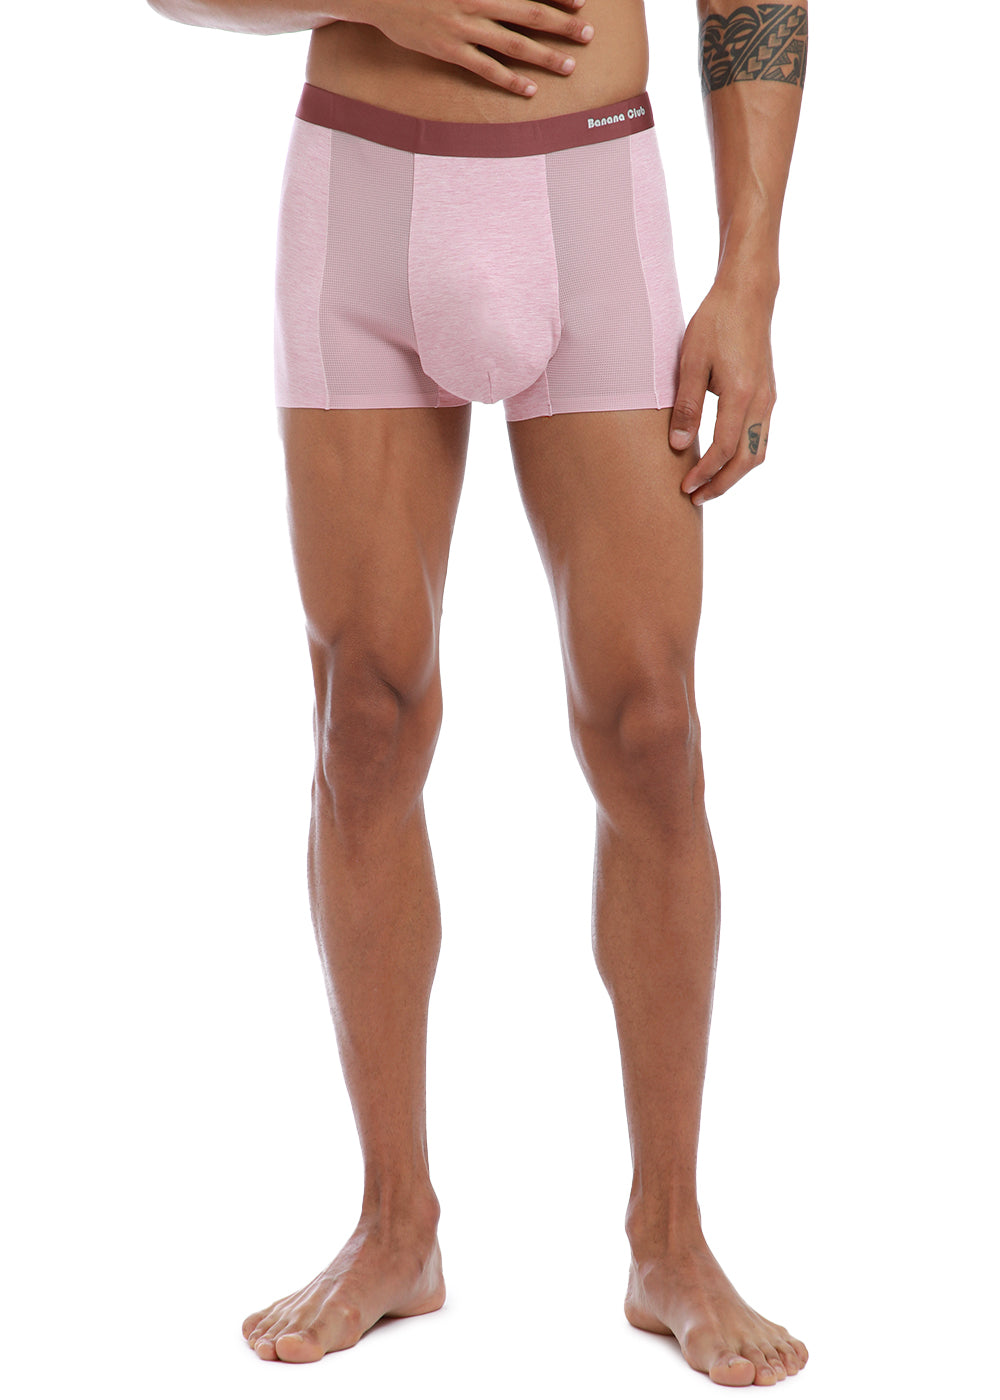 Shell pink low rise trunk